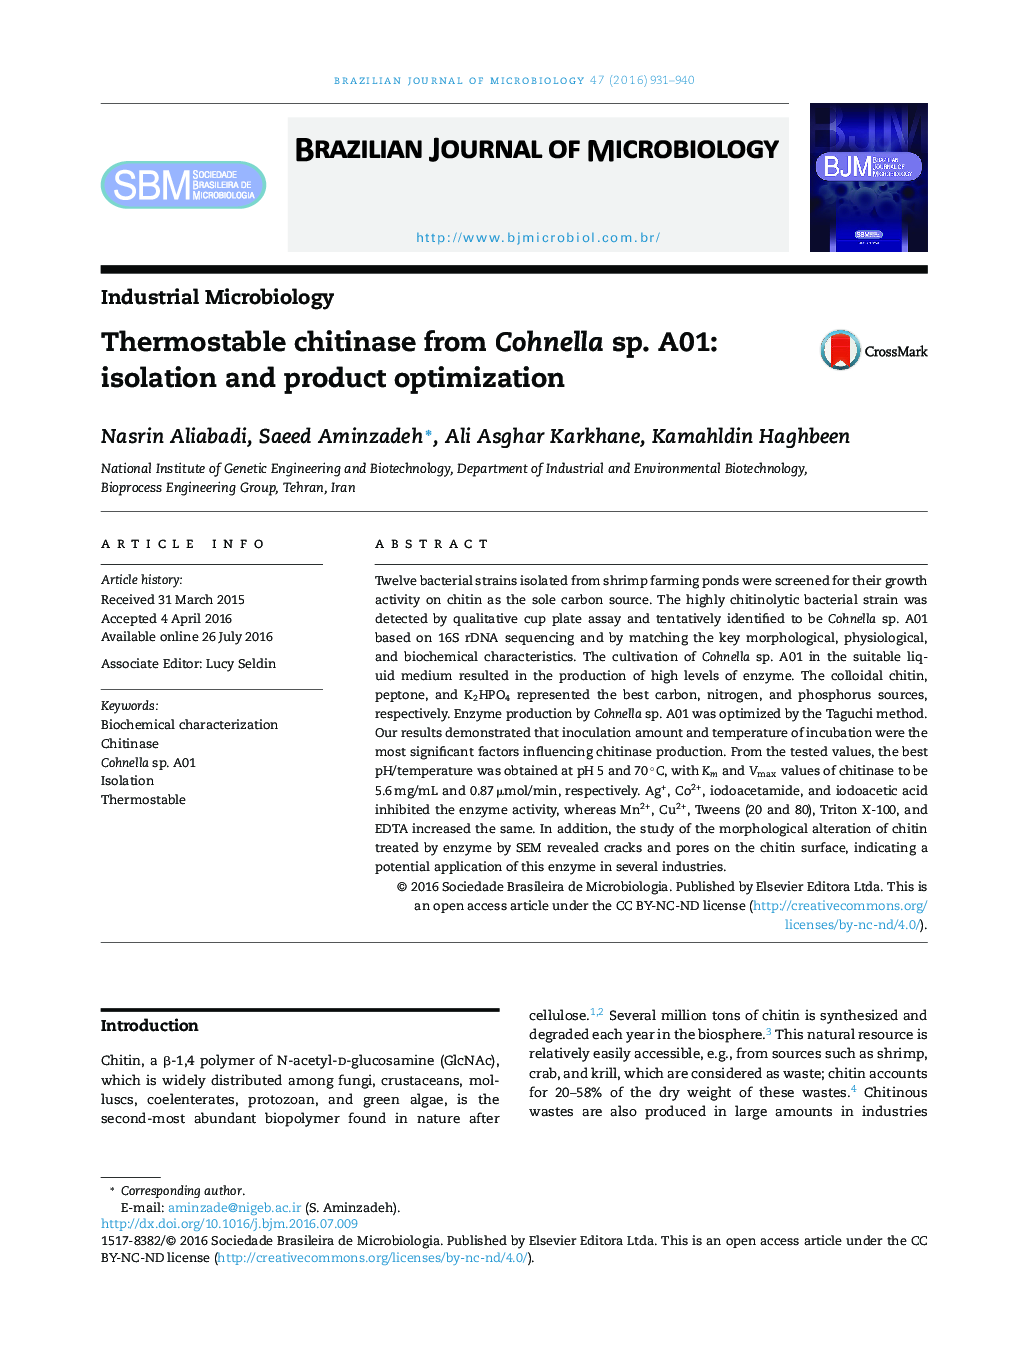 Thermostable chitinase from Cohnella sp. A01: isolation and product optimization